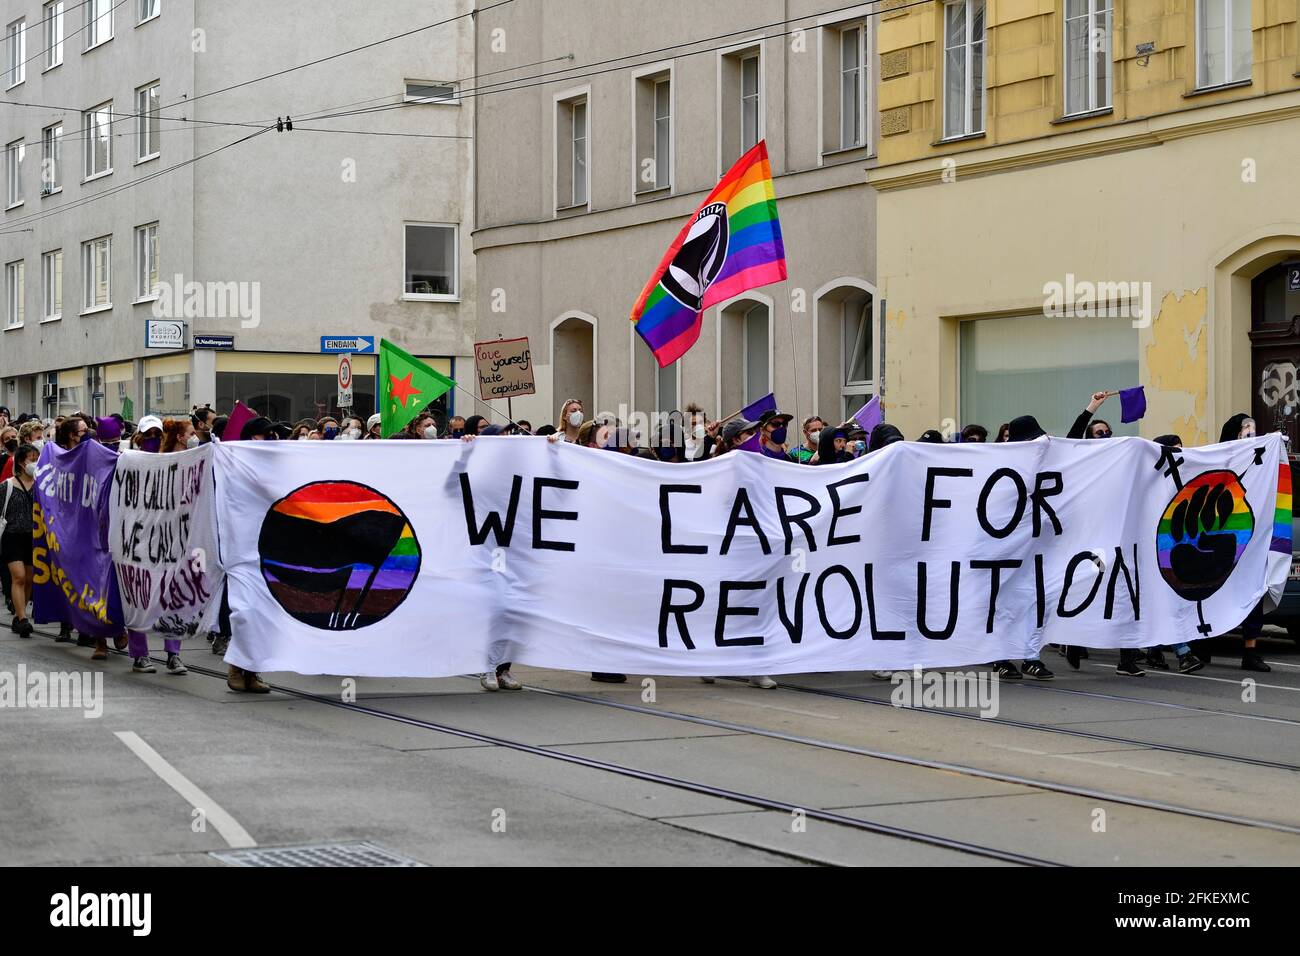 Vienna, Austria. 1st May 2021. Big demonstration day on May 1st in Vienna. The police are also expecting several unregistered demonstrations and will cordon off several streets in downtown Vienna for safety. Mayday Vienna demonstration.  Credit: Franz Perc / Alamy Live News Stock Photo